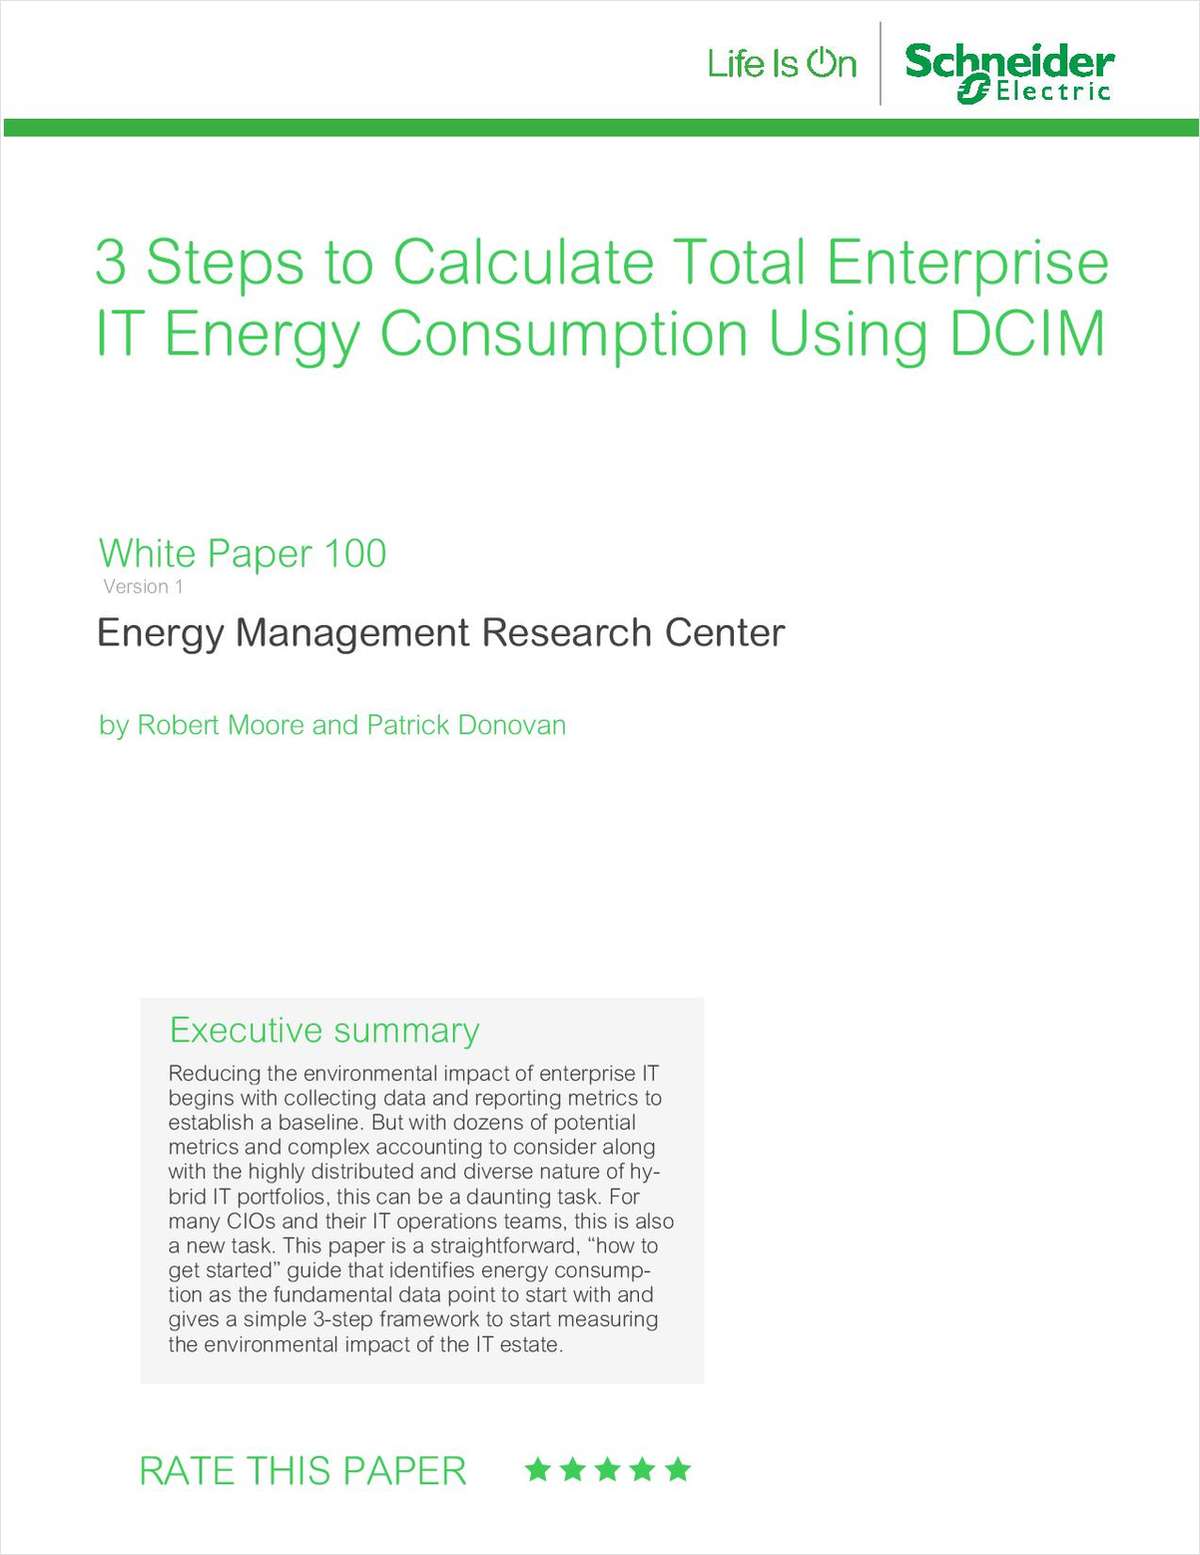 3 Steps to Calculate Total Enterprise IT Energy Consumption Using DCIM